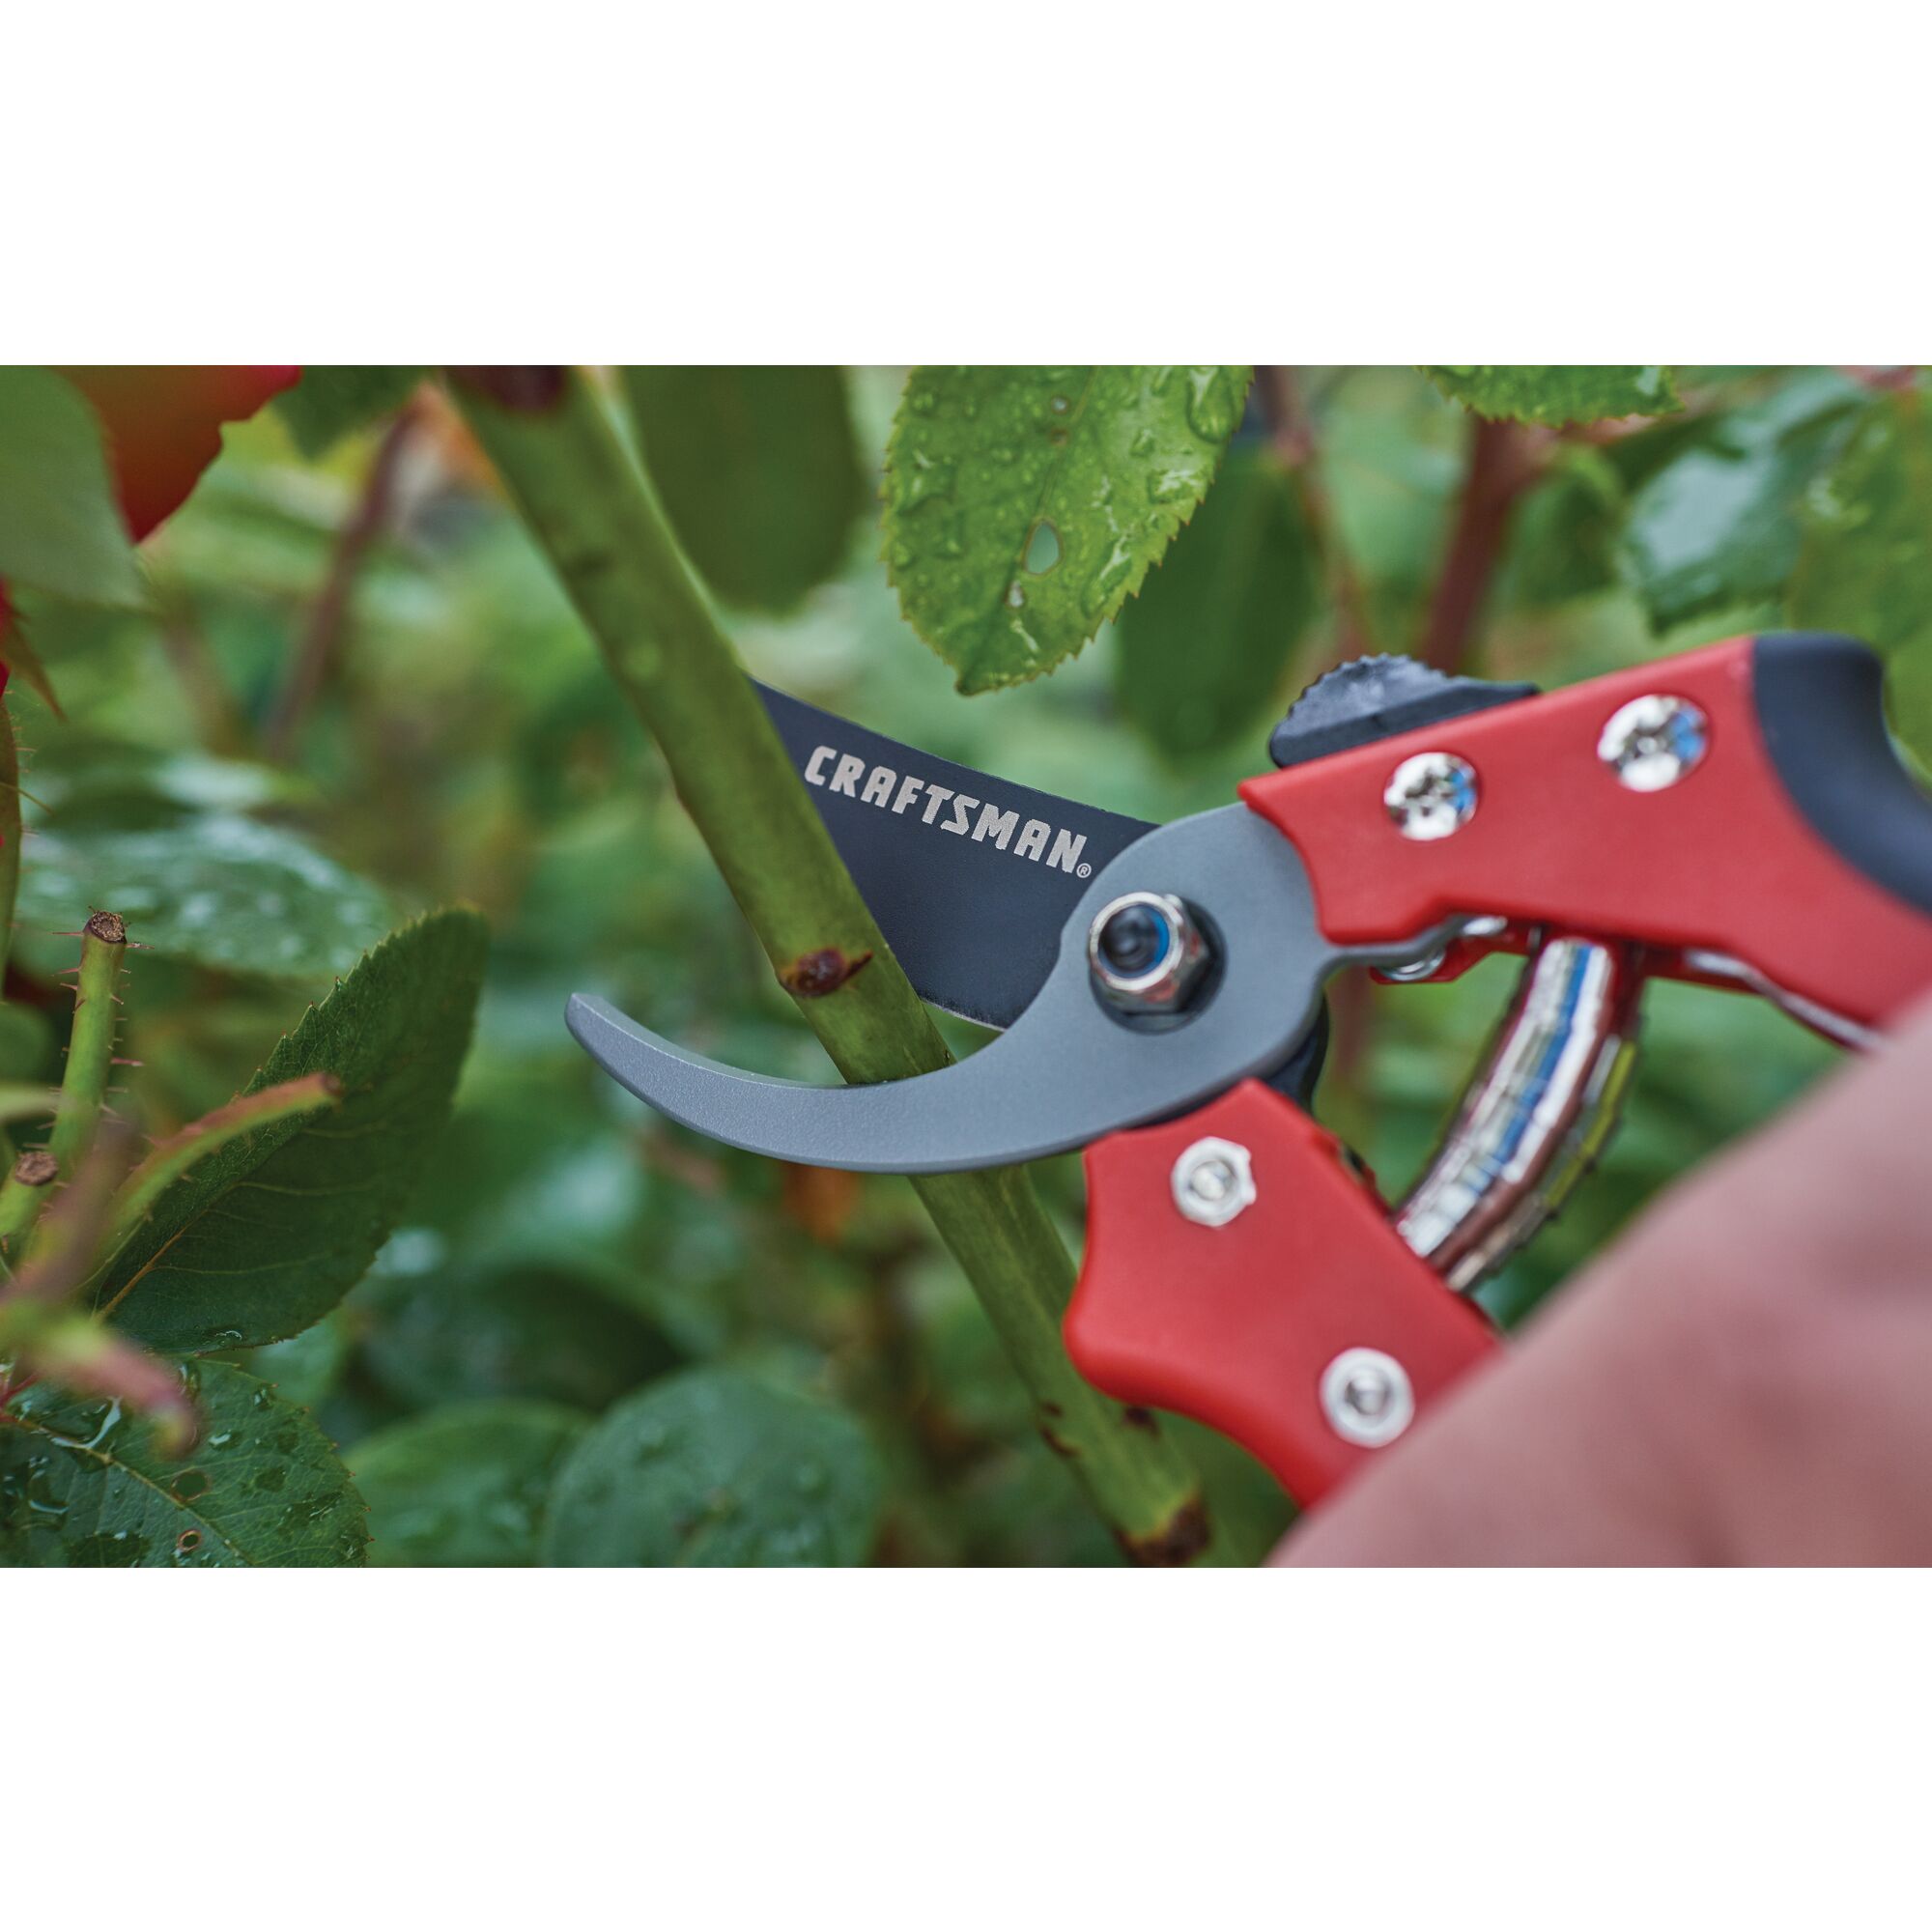 3 quarter inch cut bypass pruner being used by a person to prune a branch.